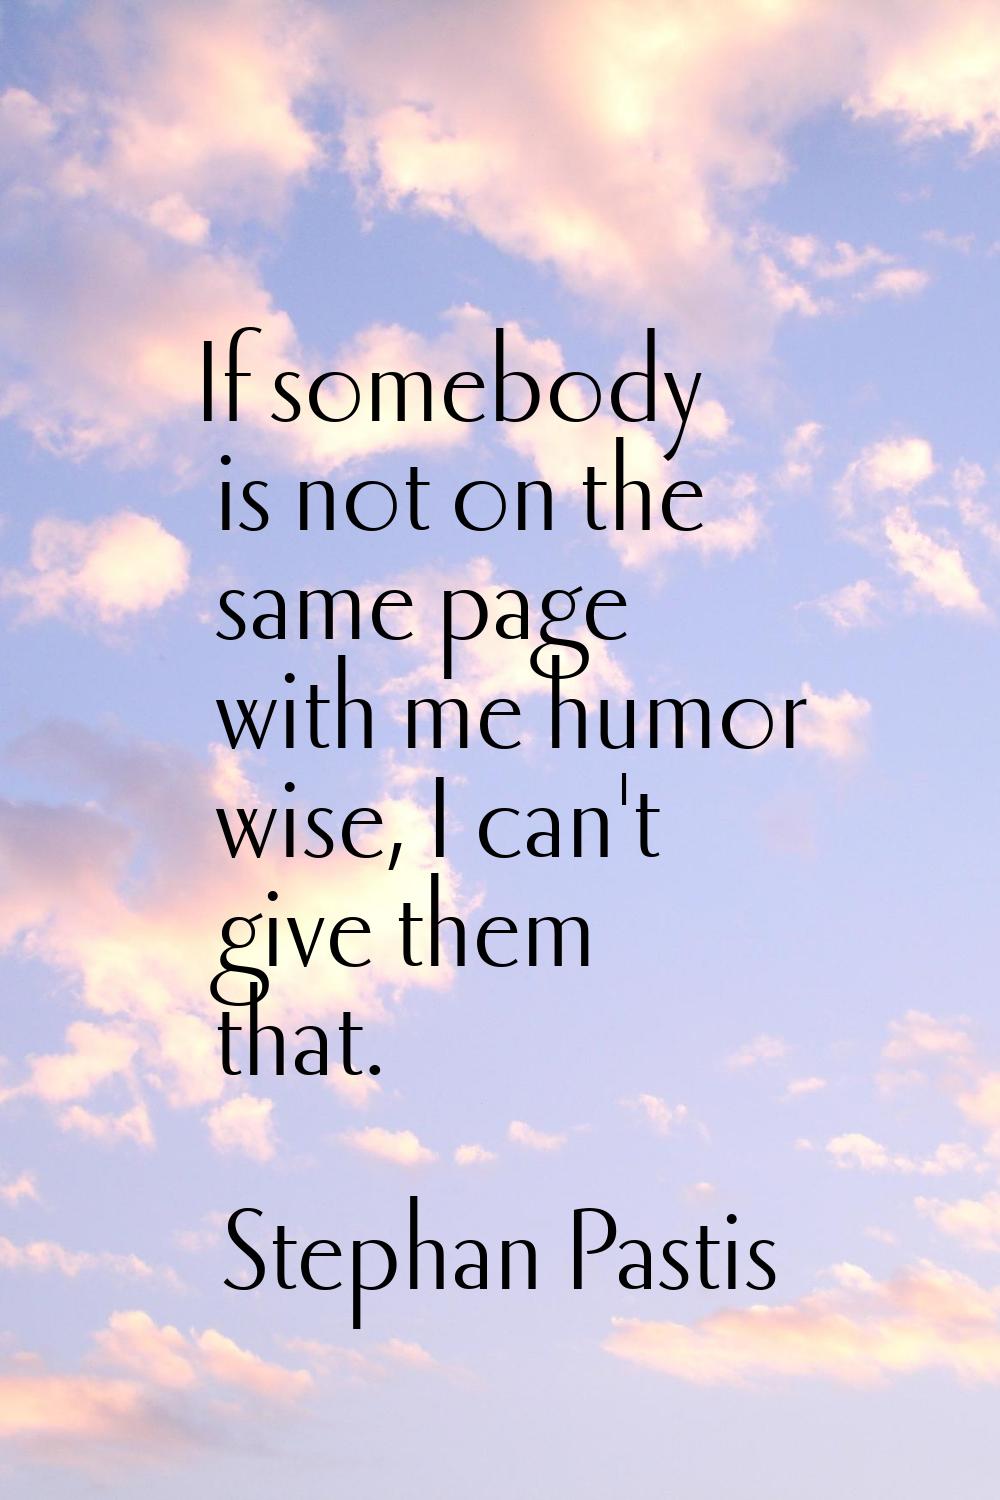 If somebody is not on the same page with me humor wise, I can't give them that.